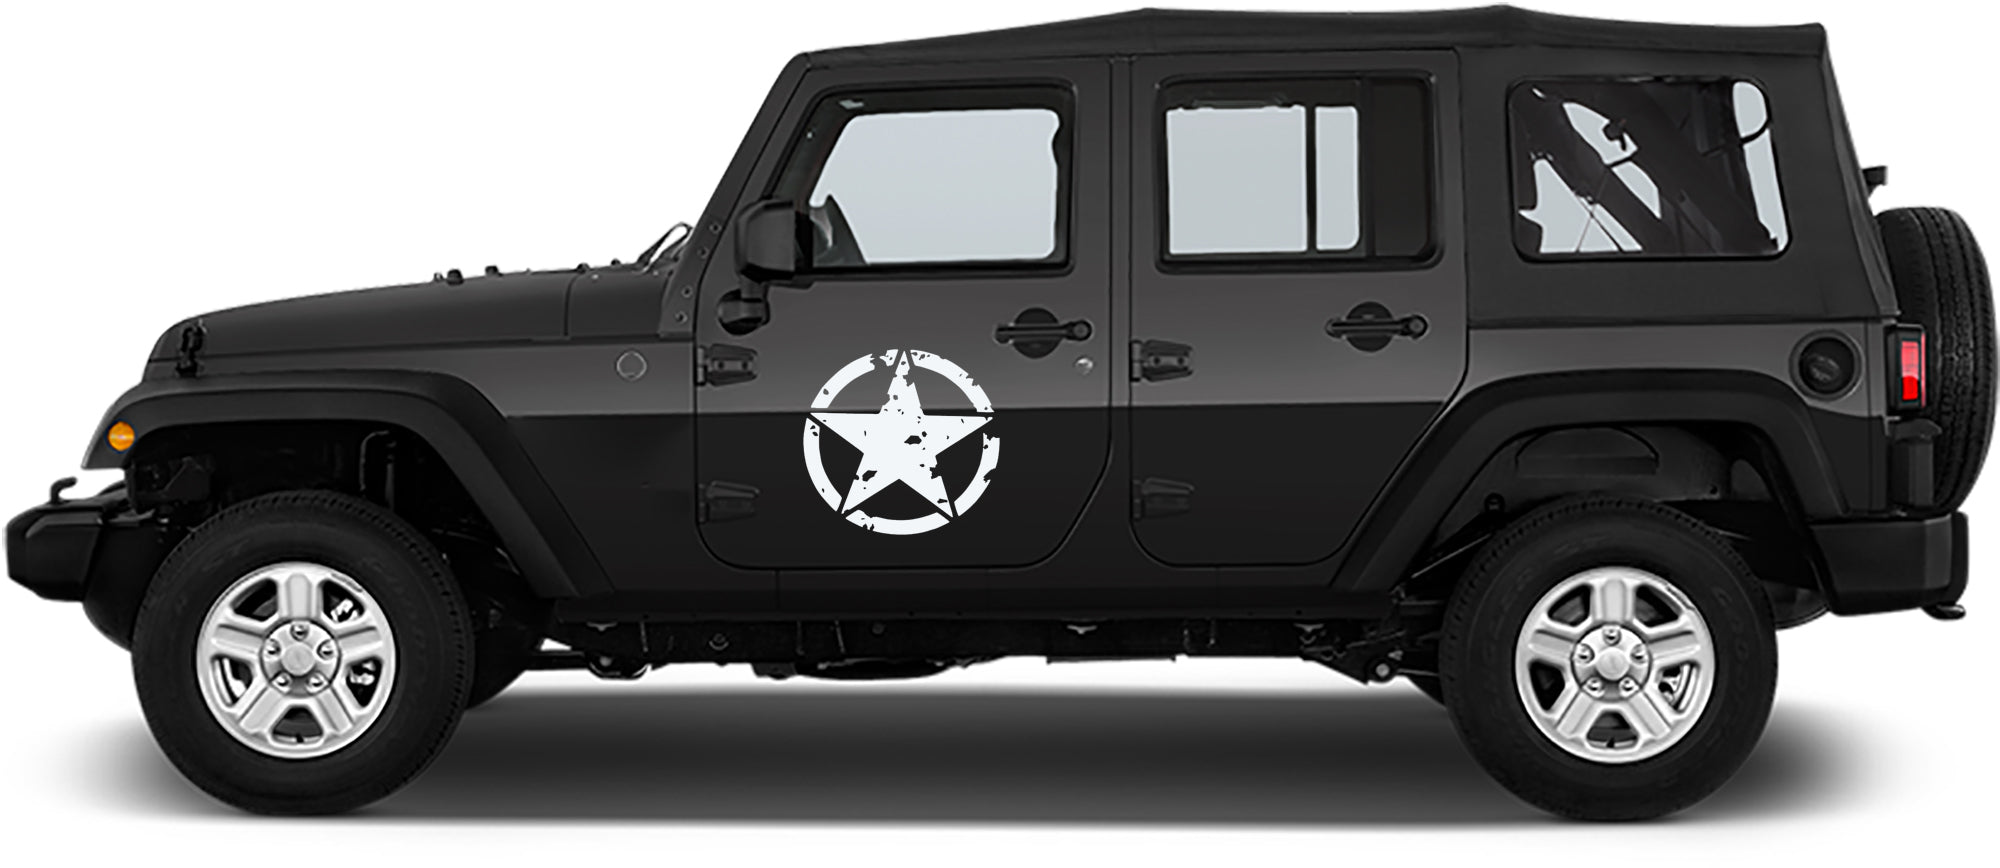 Jeep Wrangler JK Army Star Side Decals (Pair) : Vinyl Graphics Kit fits (2007-2018)